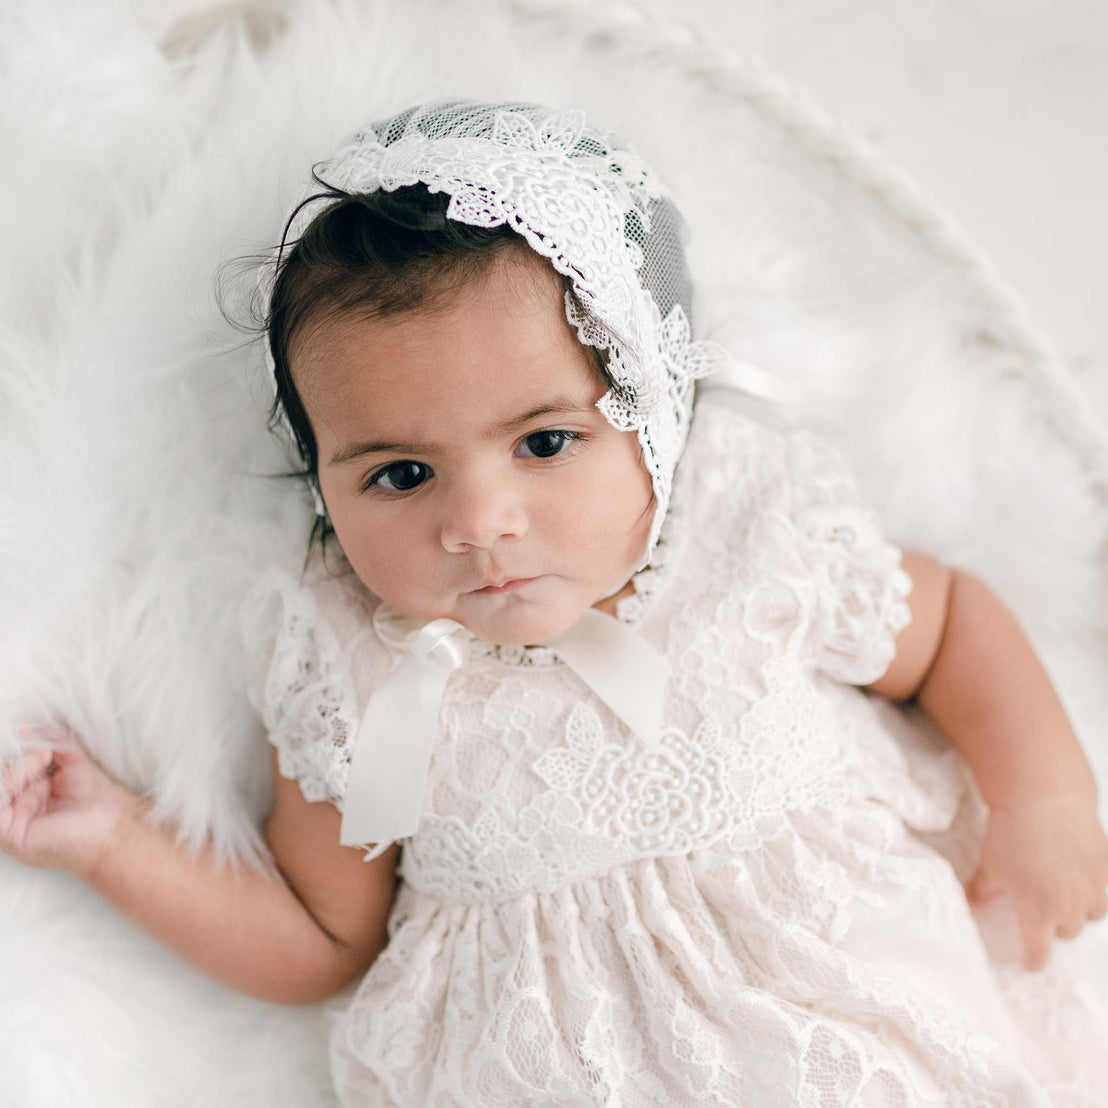 A baby wearing a Juliette Layette, lies on a fluffy white blanket, gazing upwards with a thoughtful expression.